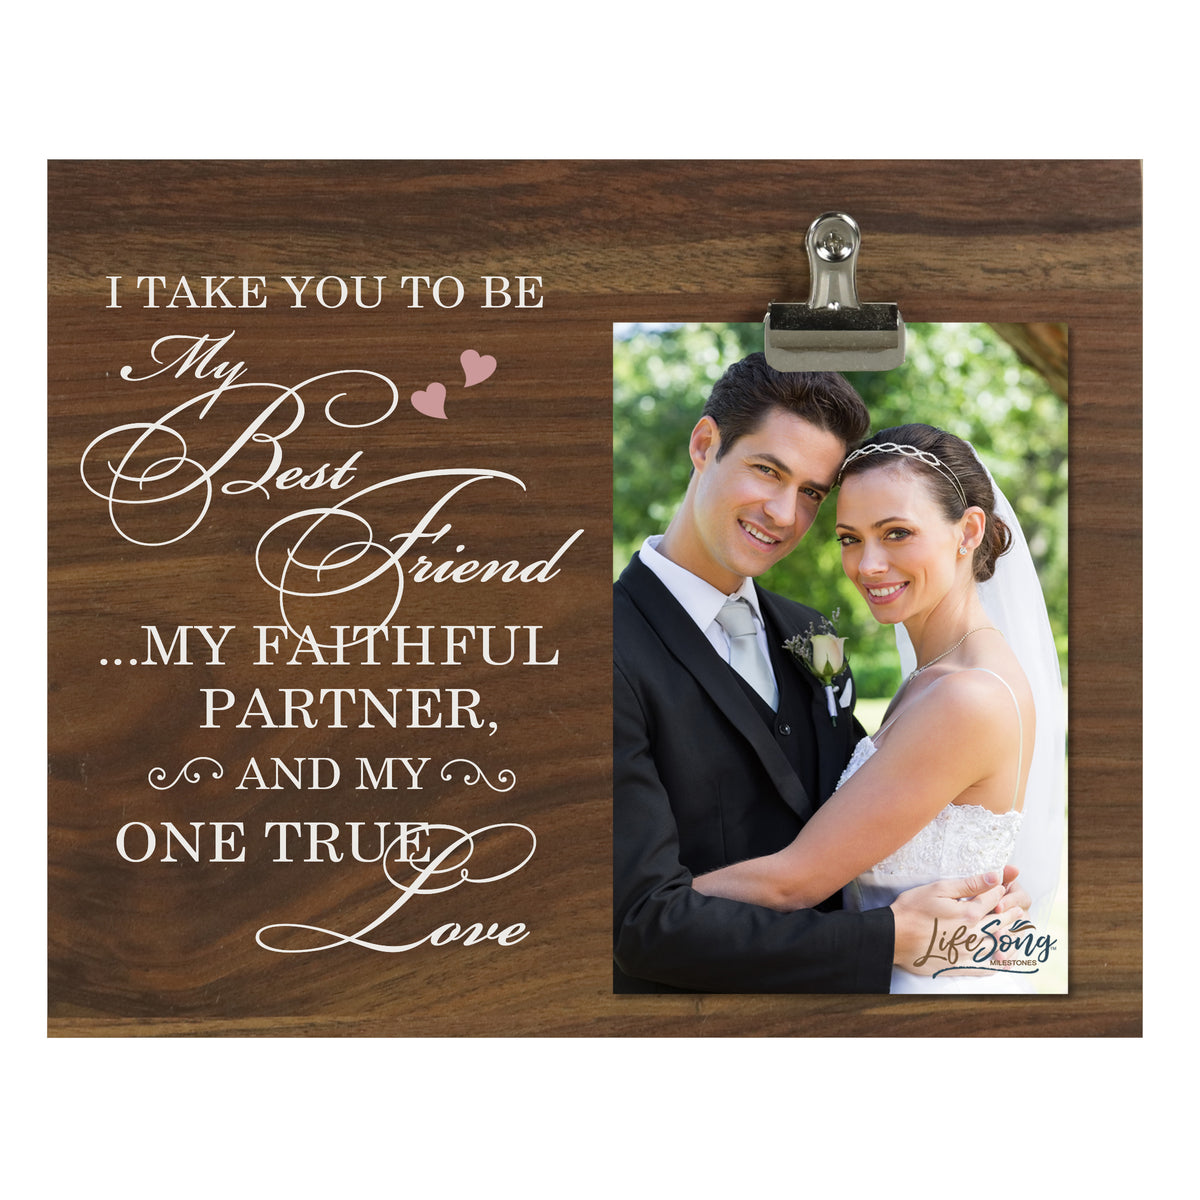 LifeSong Milestones Wedding Vow Anniversary Wooden 8&quot;x 10&quot; Clip Photo Picture Frame Engagement Gift for Couple, Best Friends, Newlywed Mr and Mrs. 4 x 6 Photo